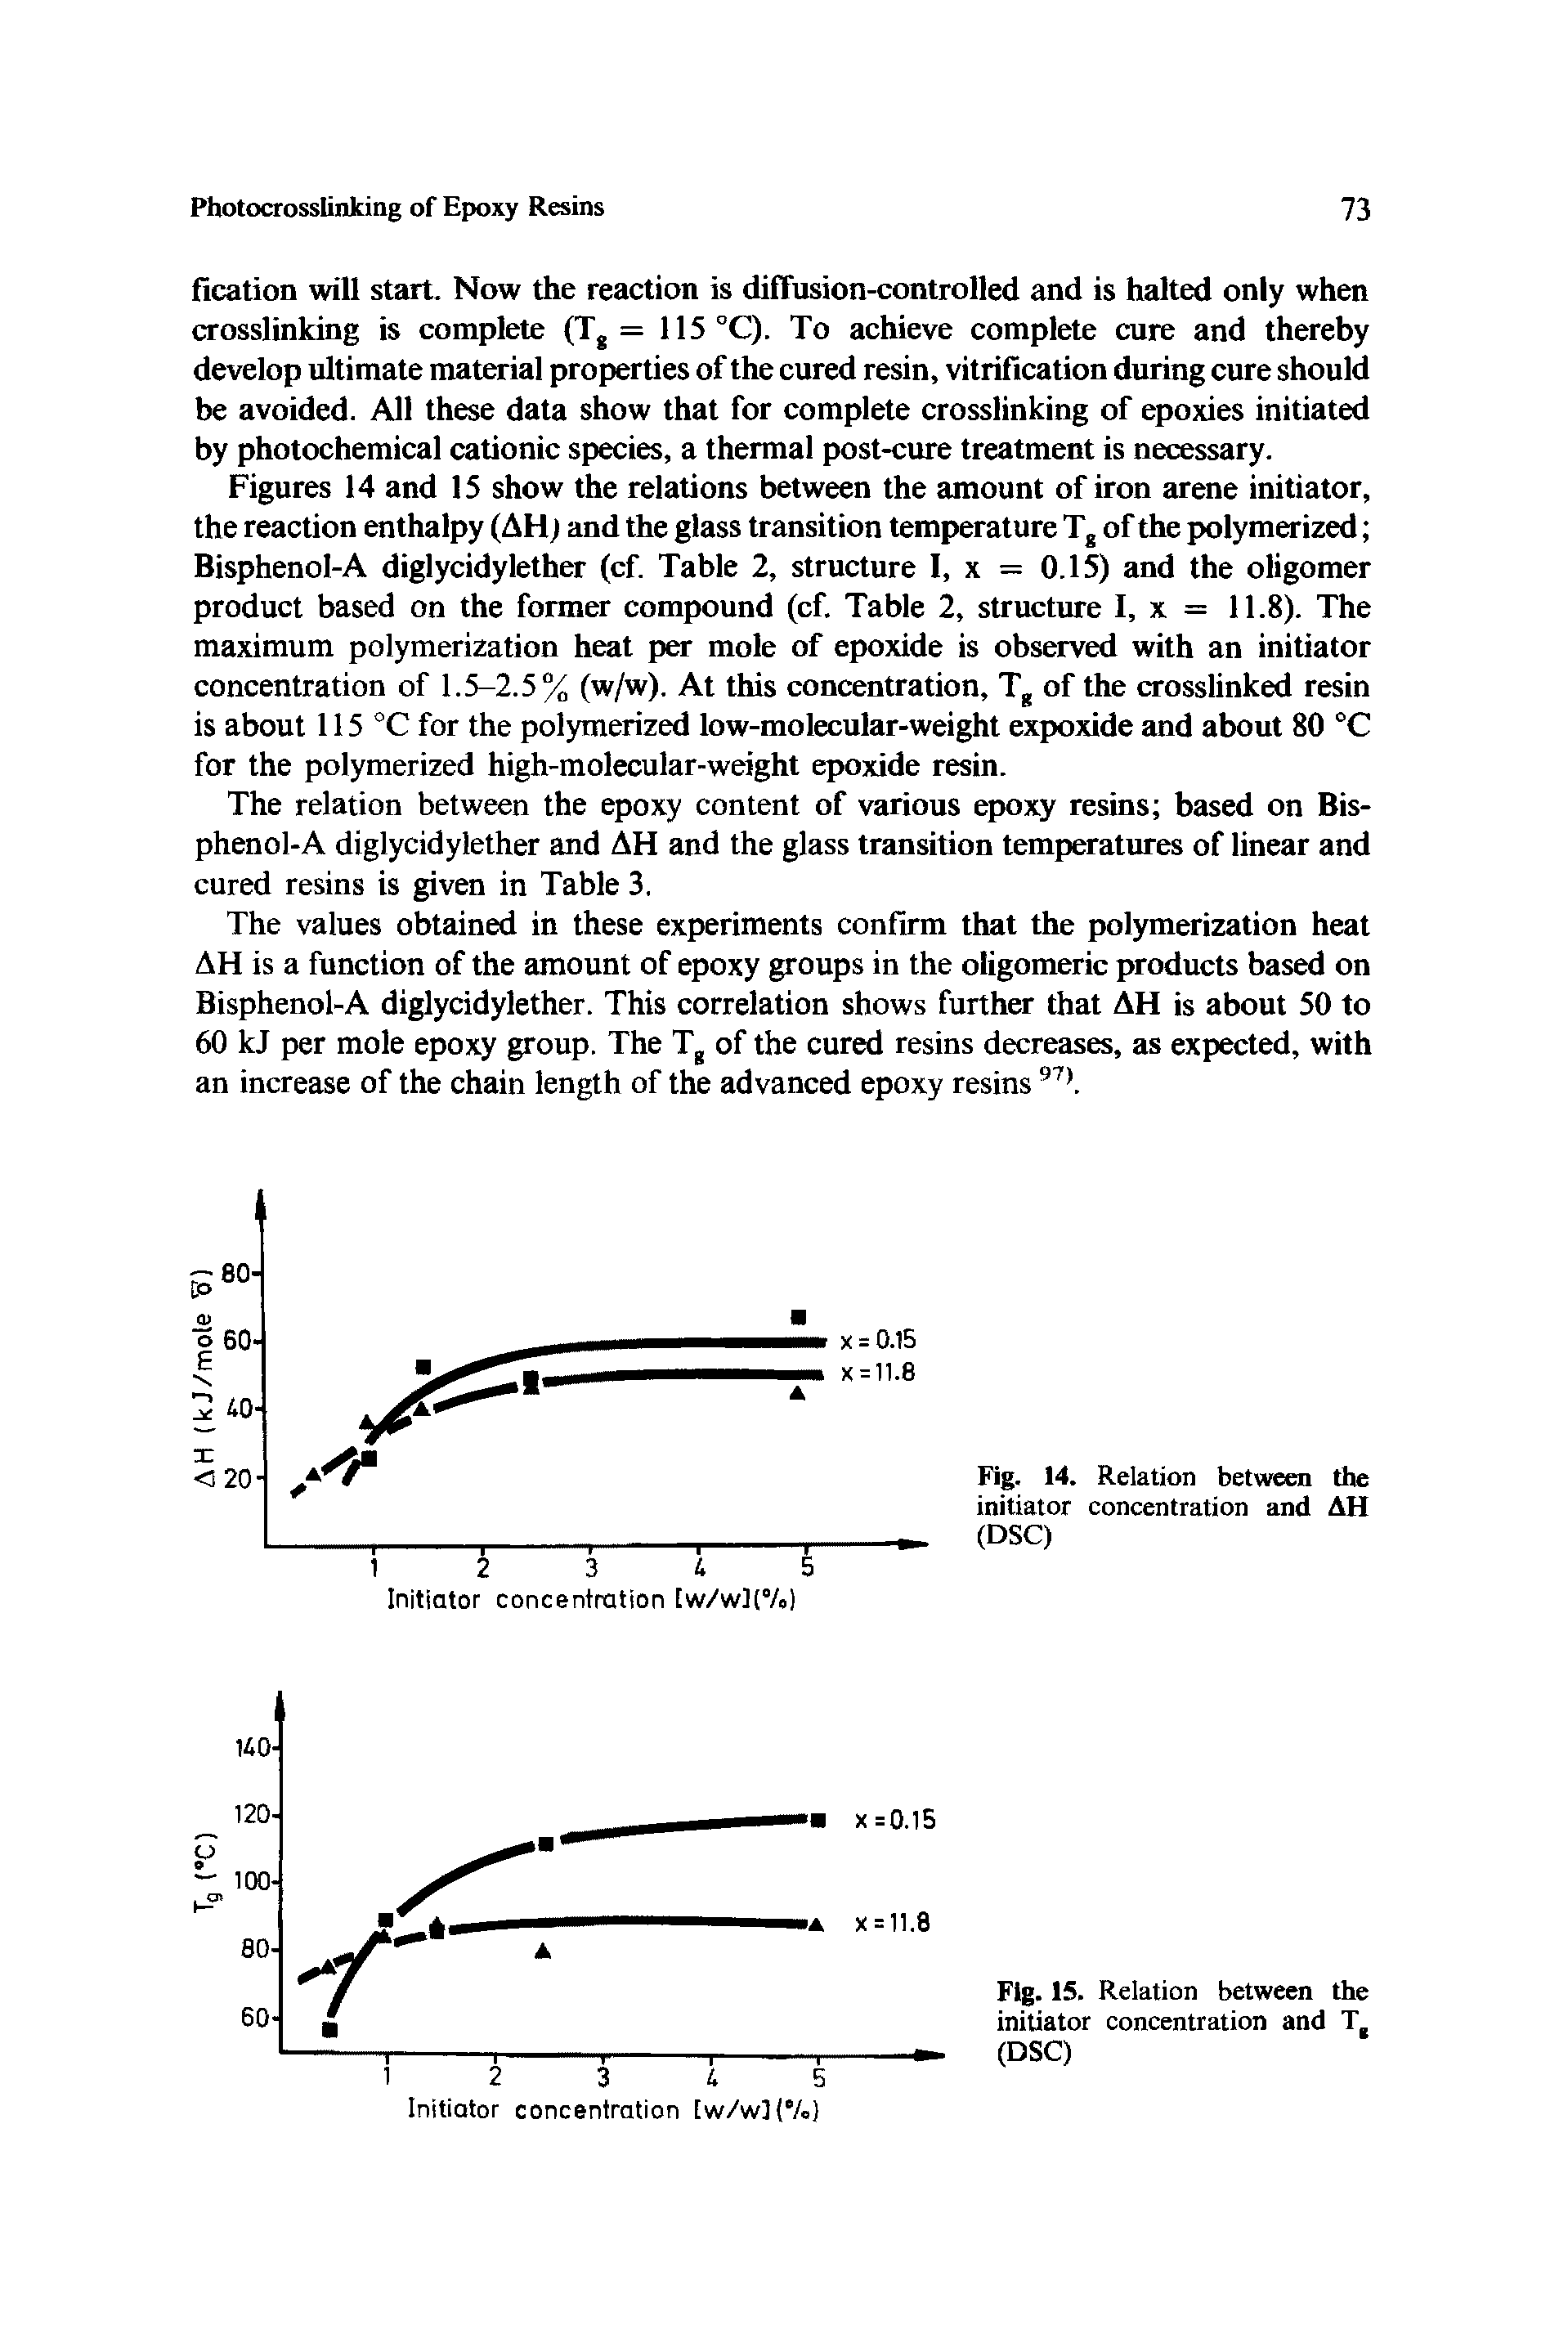 Figures 14 and 15 show the relations between the amount of iron arene initiator, the reaction enthalpy (AHj and the glass transition temperature Tg of the polymerized Bisphenol-A diglycidylether (cf. Table 2, structure I, x = 0.15) and the oligomer product based on the former compound (cf. Table 2, structure I, x = 11.8). The maximum polymerization heat per mole of epoxide is observed ivith an initiator concentration of 1.5-2.5% (w/w). At this concentration, Tg of the crosslinked resin is about 115 °C for the polymerized low-molecular-weight expoxide and about 80 "C for the polymerized high-molecular-weight epoxide resin.